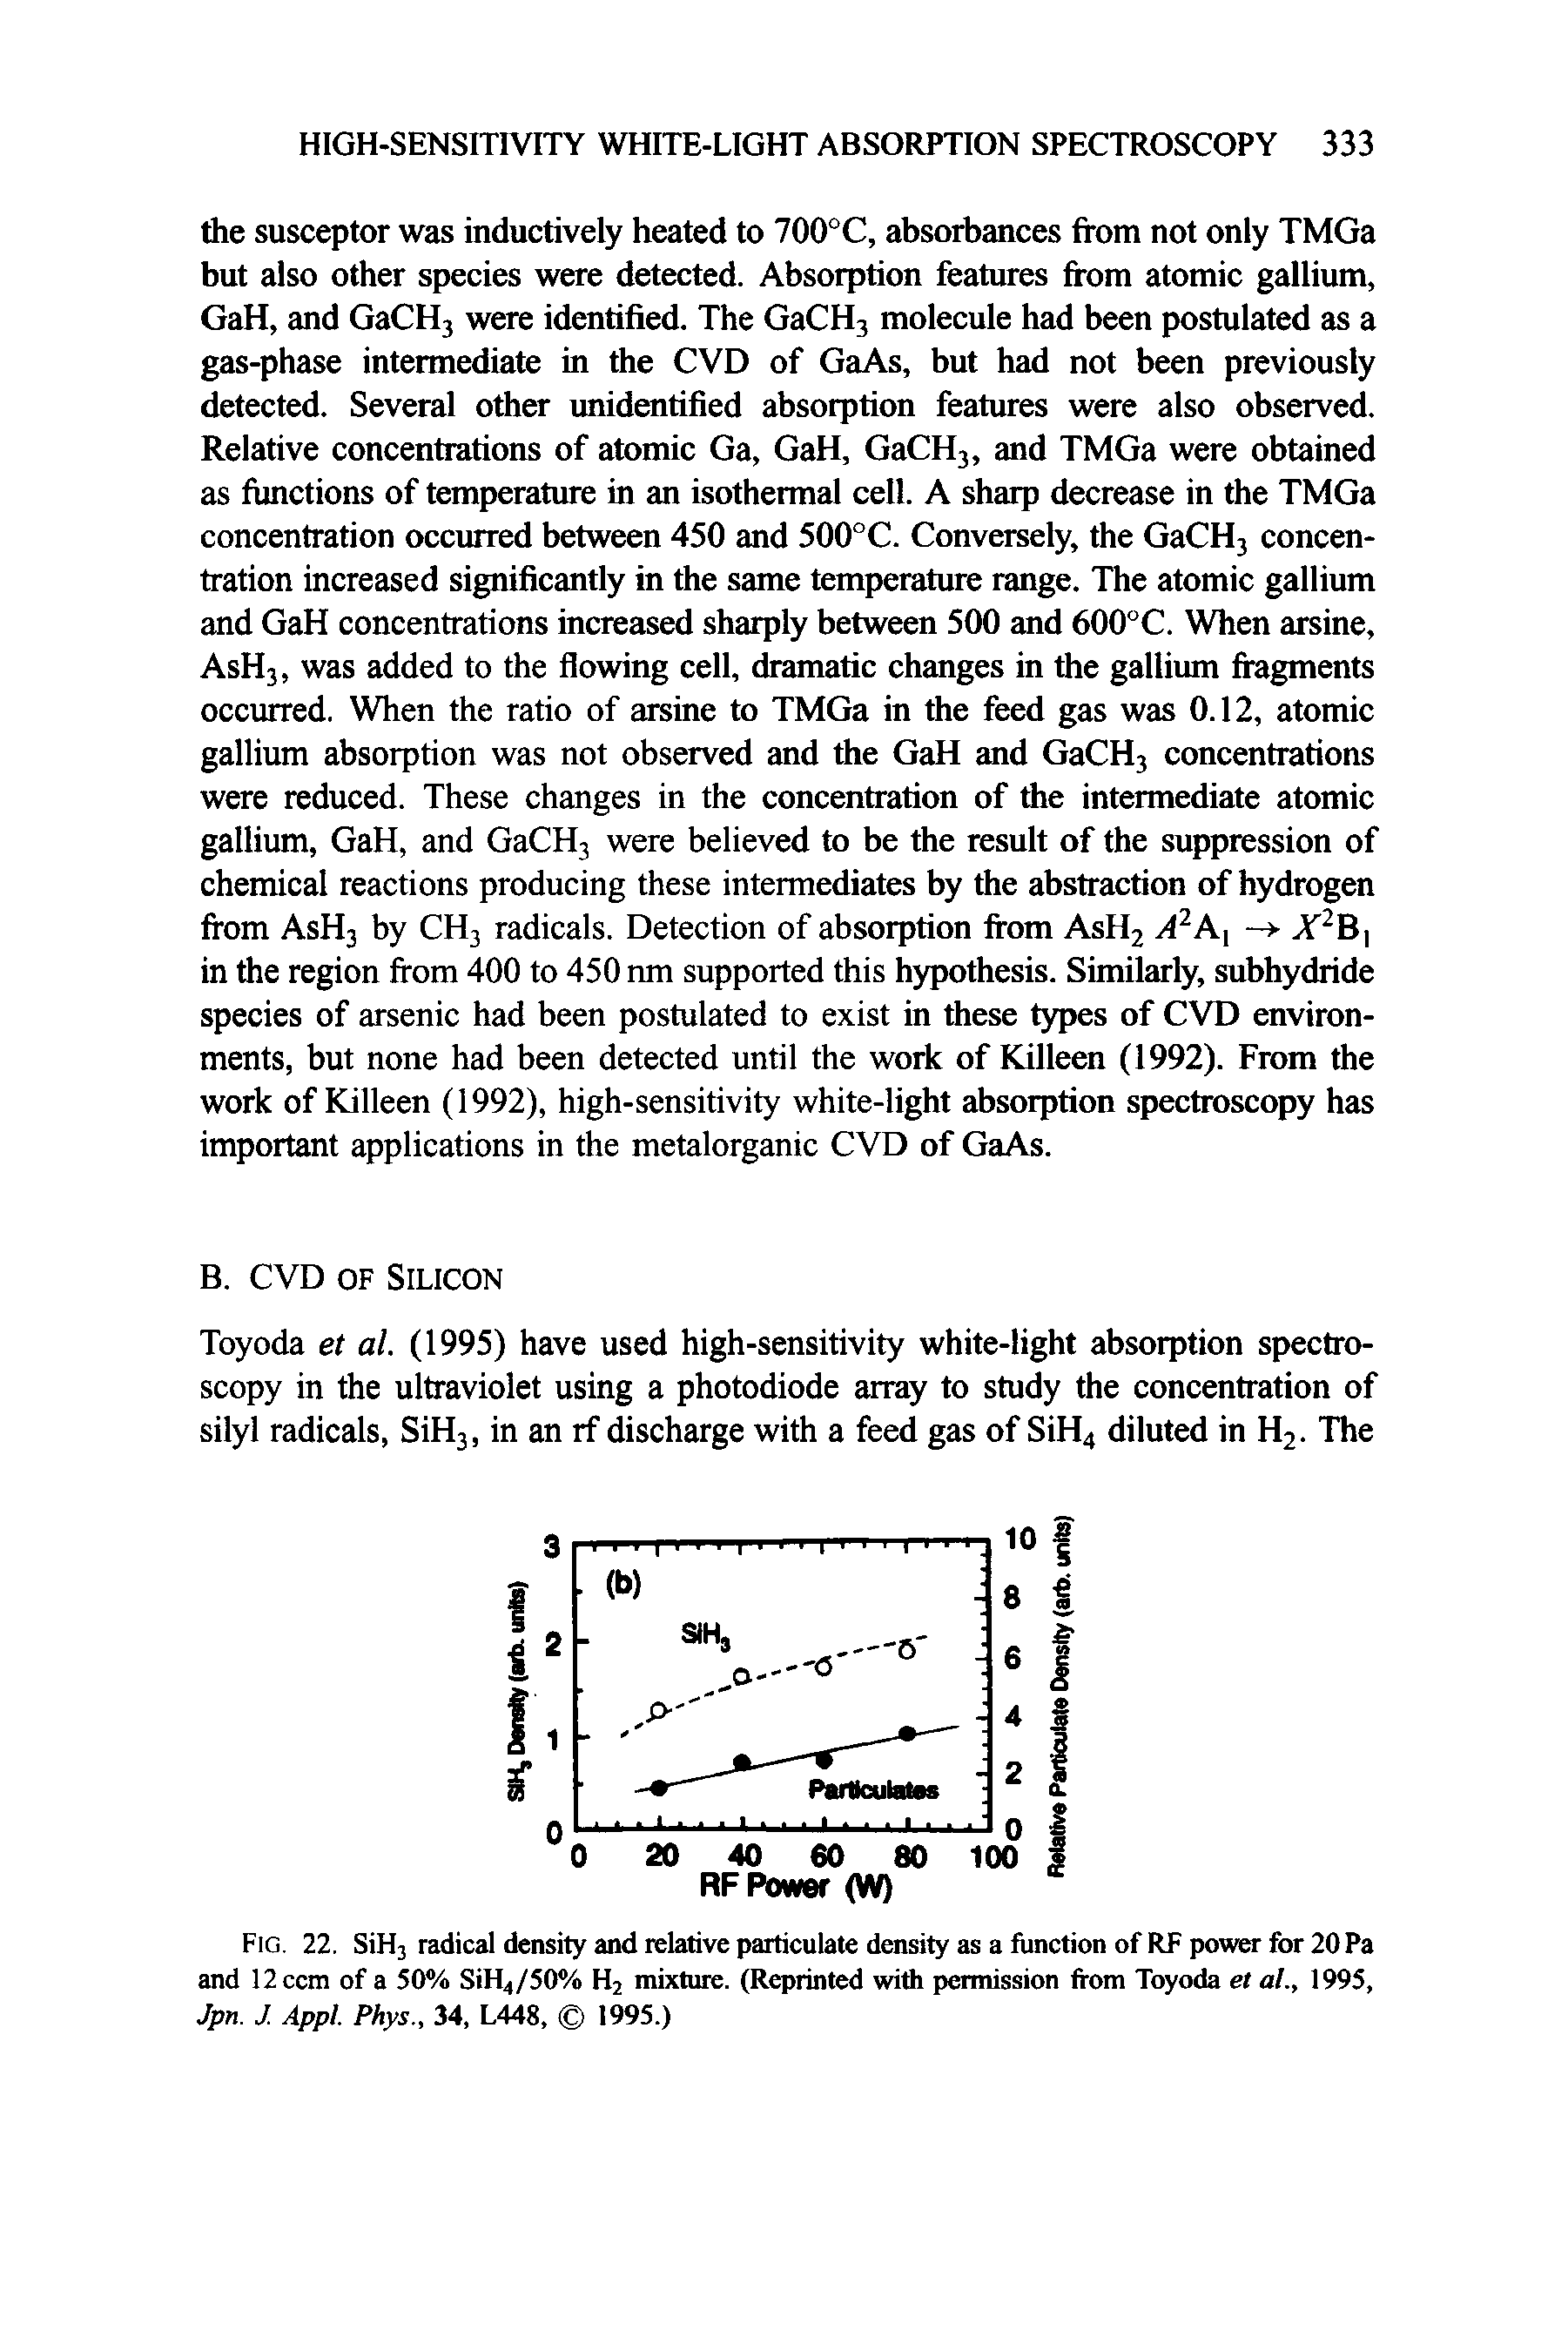 Fig. 22. SiH3 radical density and relative particulate density as a function of RF power for 20 Pa and 12ccm of a 50% SiH4/50% H2 mixture. (Reprinted with permission from Toyoda et al., 1995, Jpn. J. Appl. Phys., 34, L448, 1995.)...